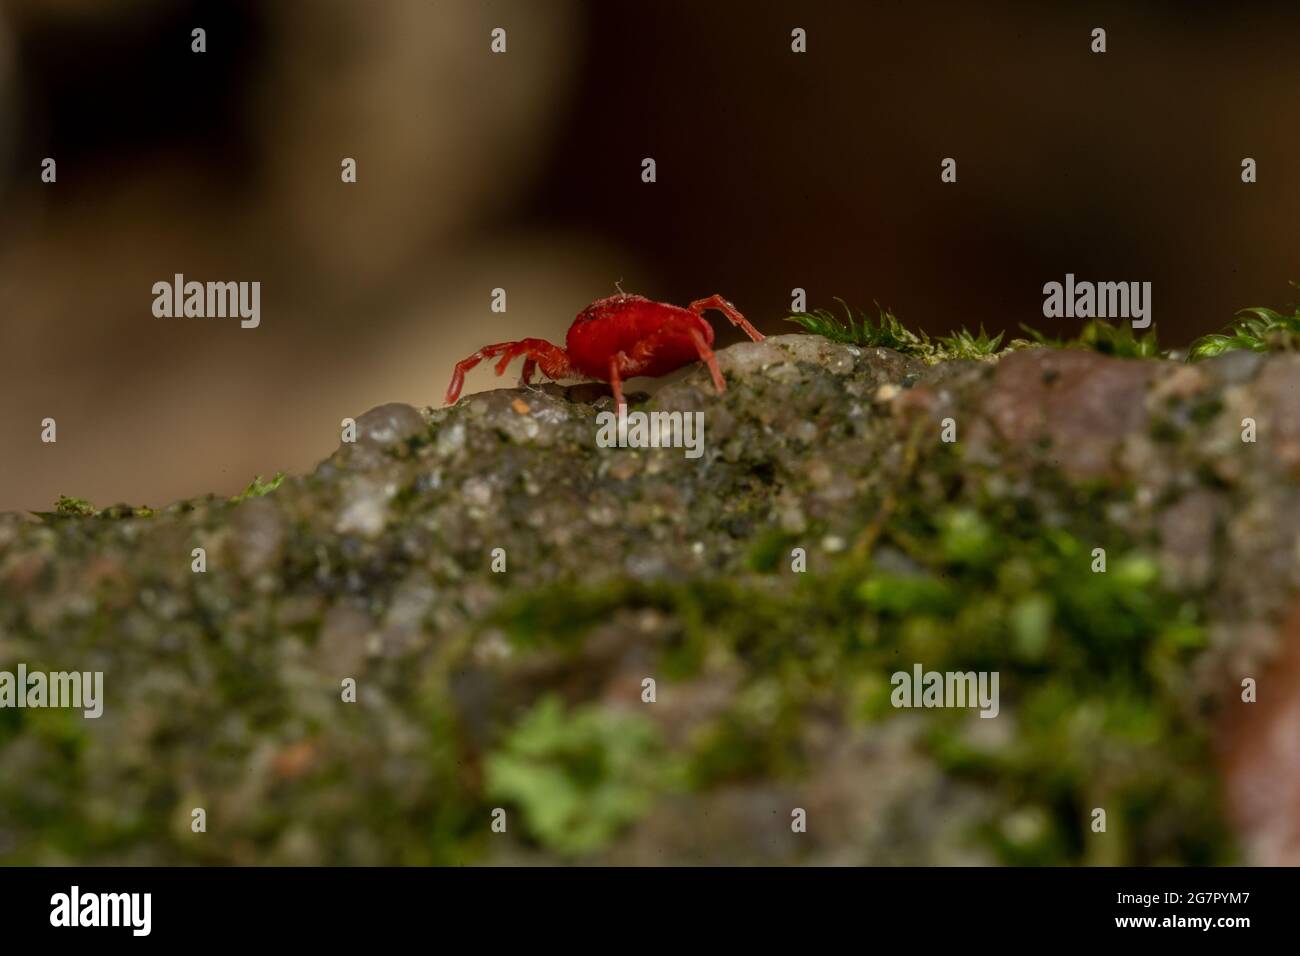 Closeup shot of Trombidiidae red insect walking on a rough surface Stock Photo